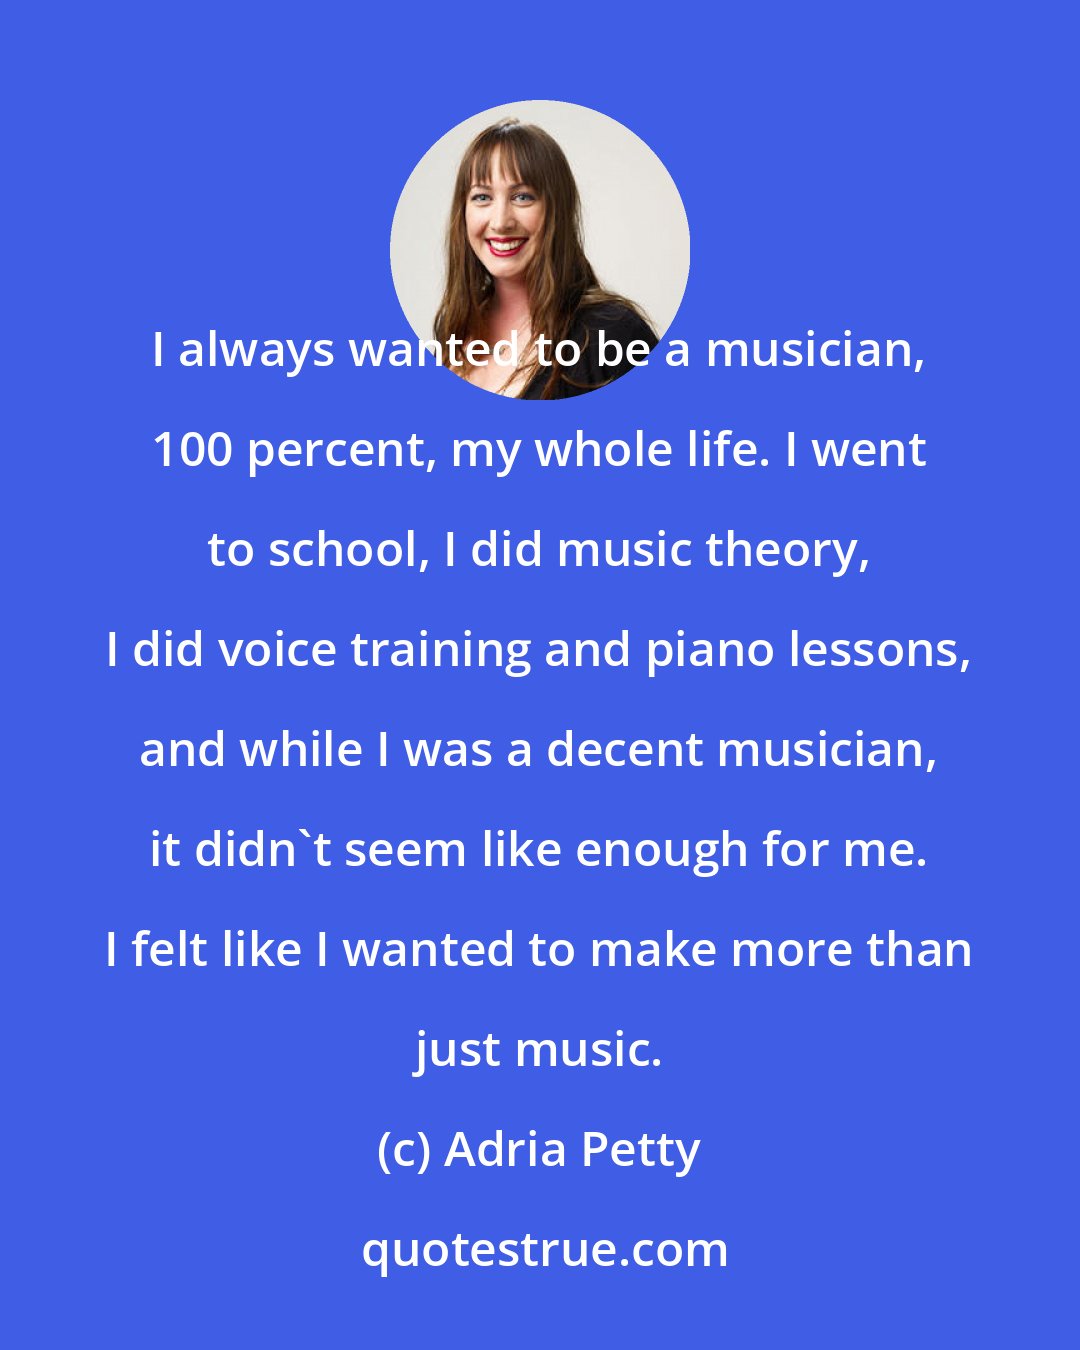 Adria Petty: I always wanted to be a musician, 100 percent, my whole life. I went to school, I did music theory, I did voice training and piano lessons, and while I was a decent musician, it didn't seem like enough for me. I felt like I wanted to make more than just music.